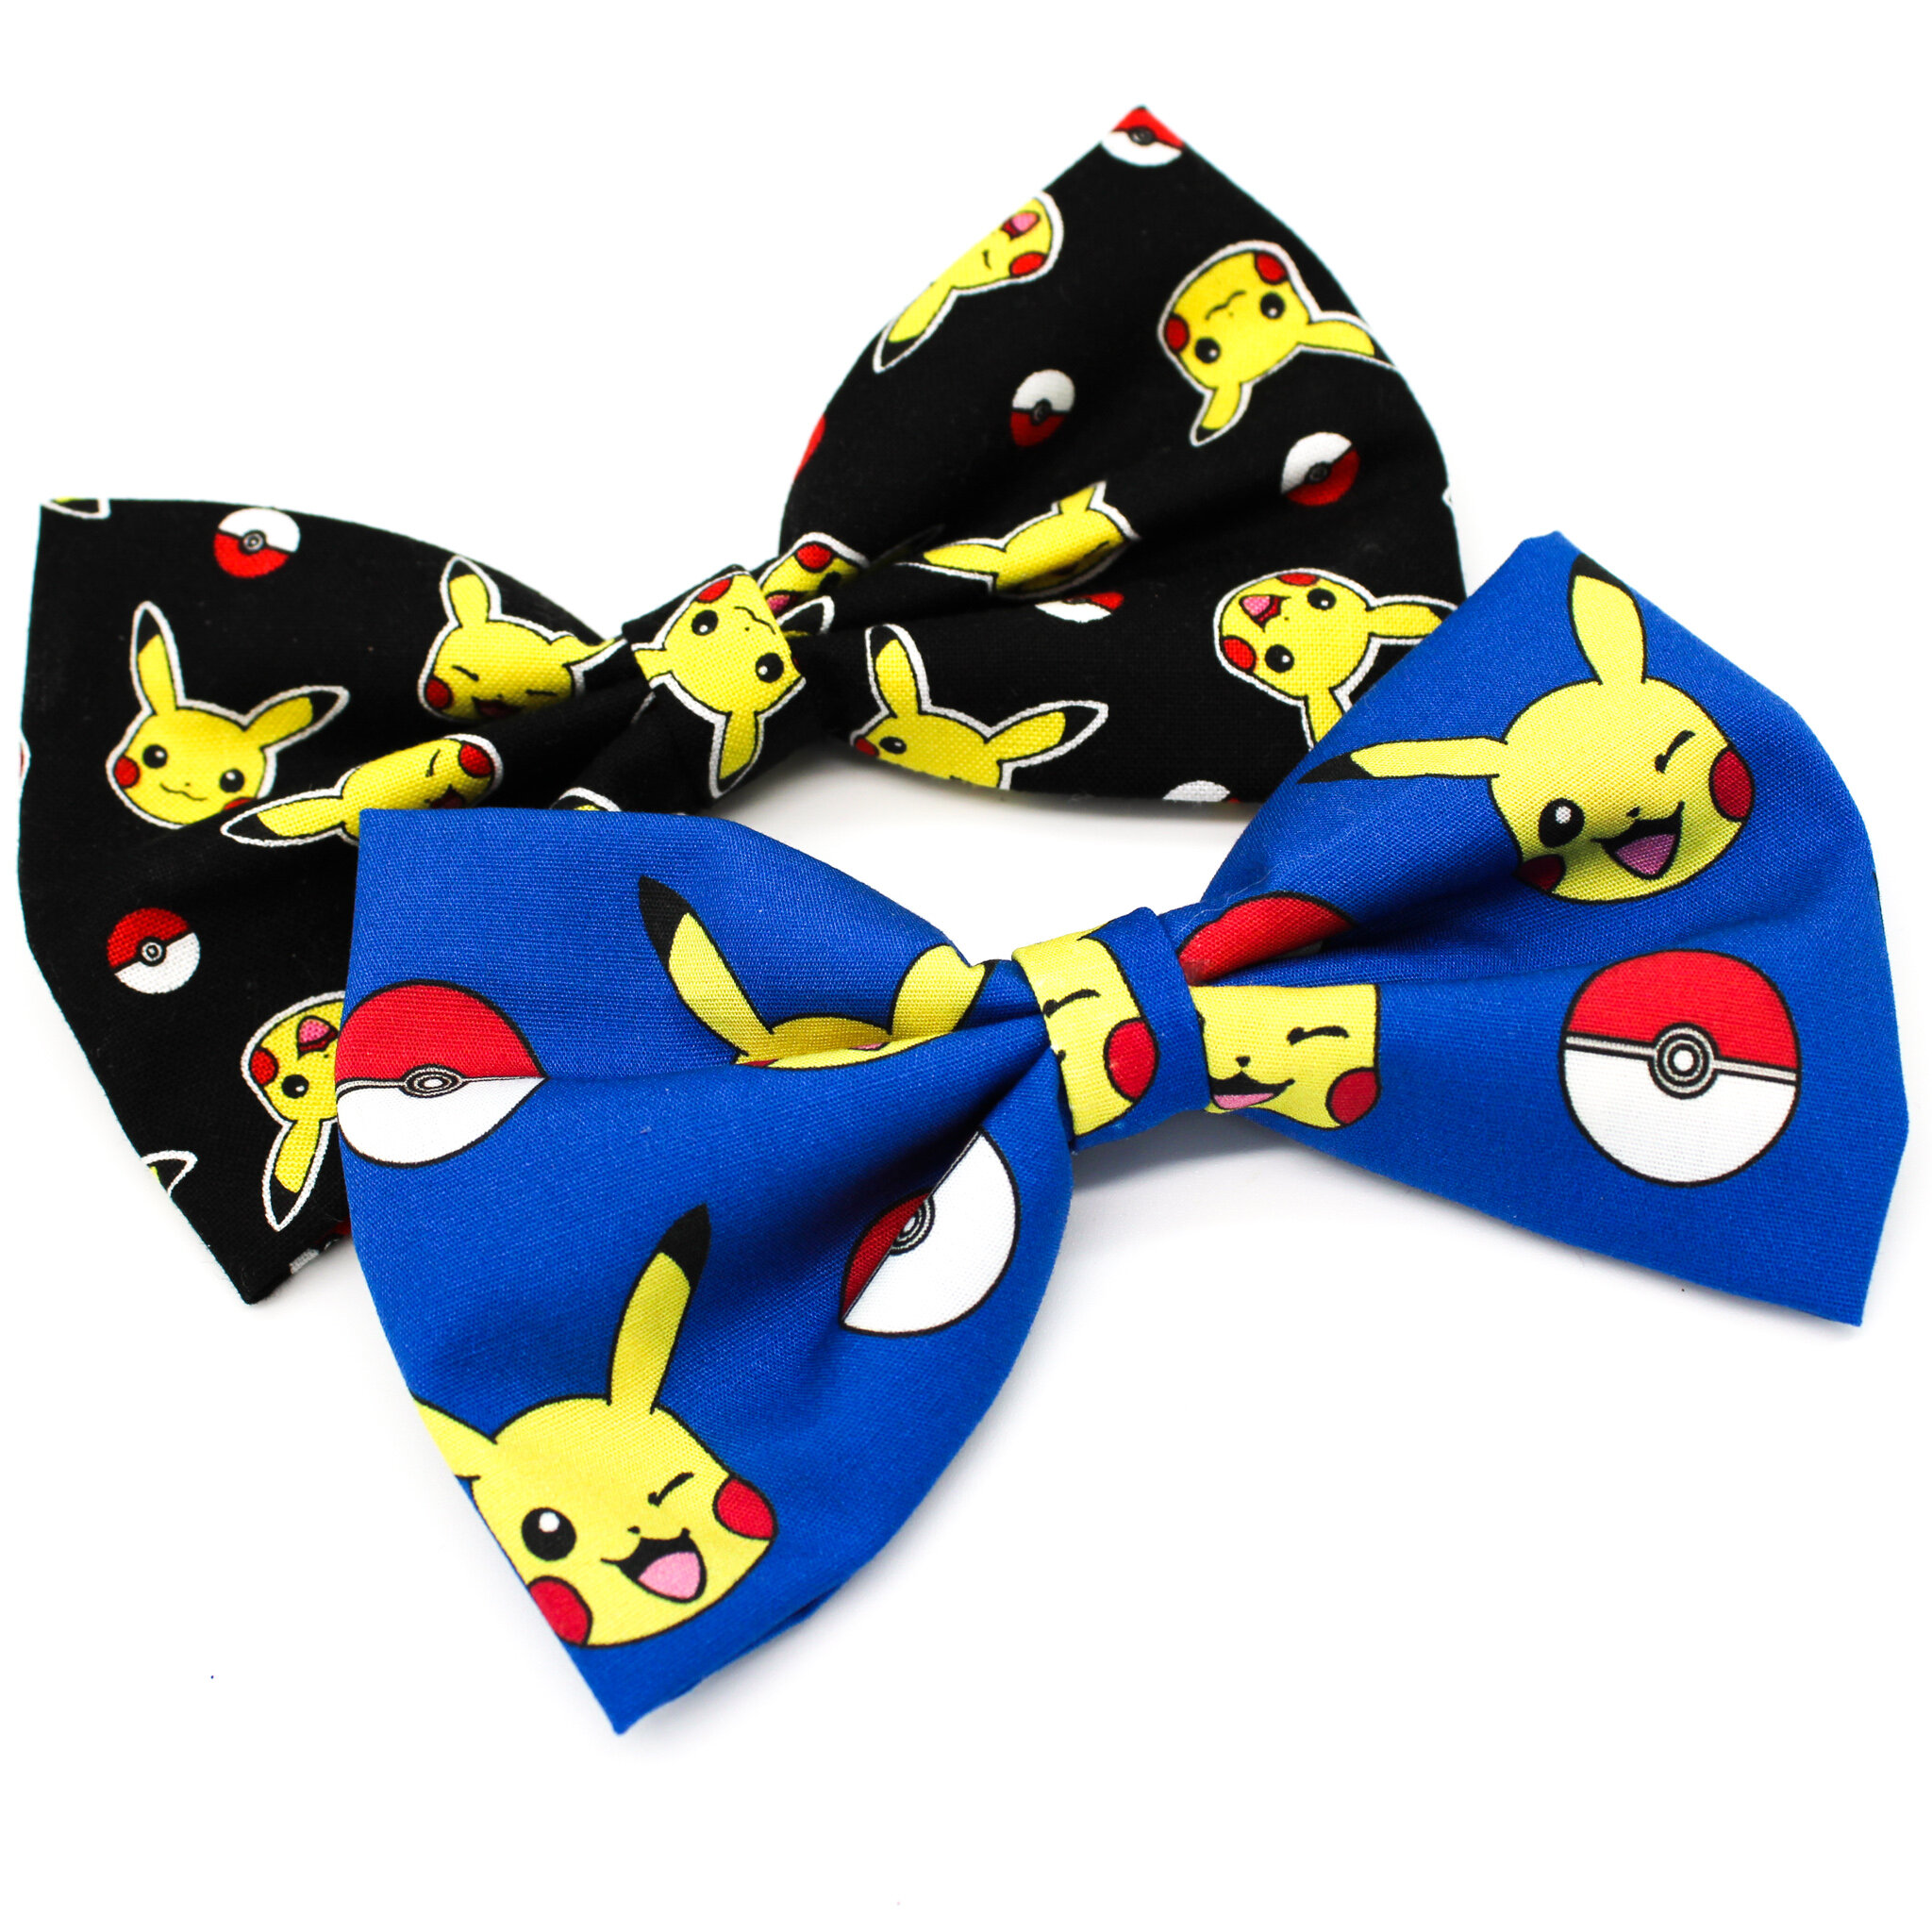 Hair Clip or Bowtie Made From Pikachu and Pokeball Fabric